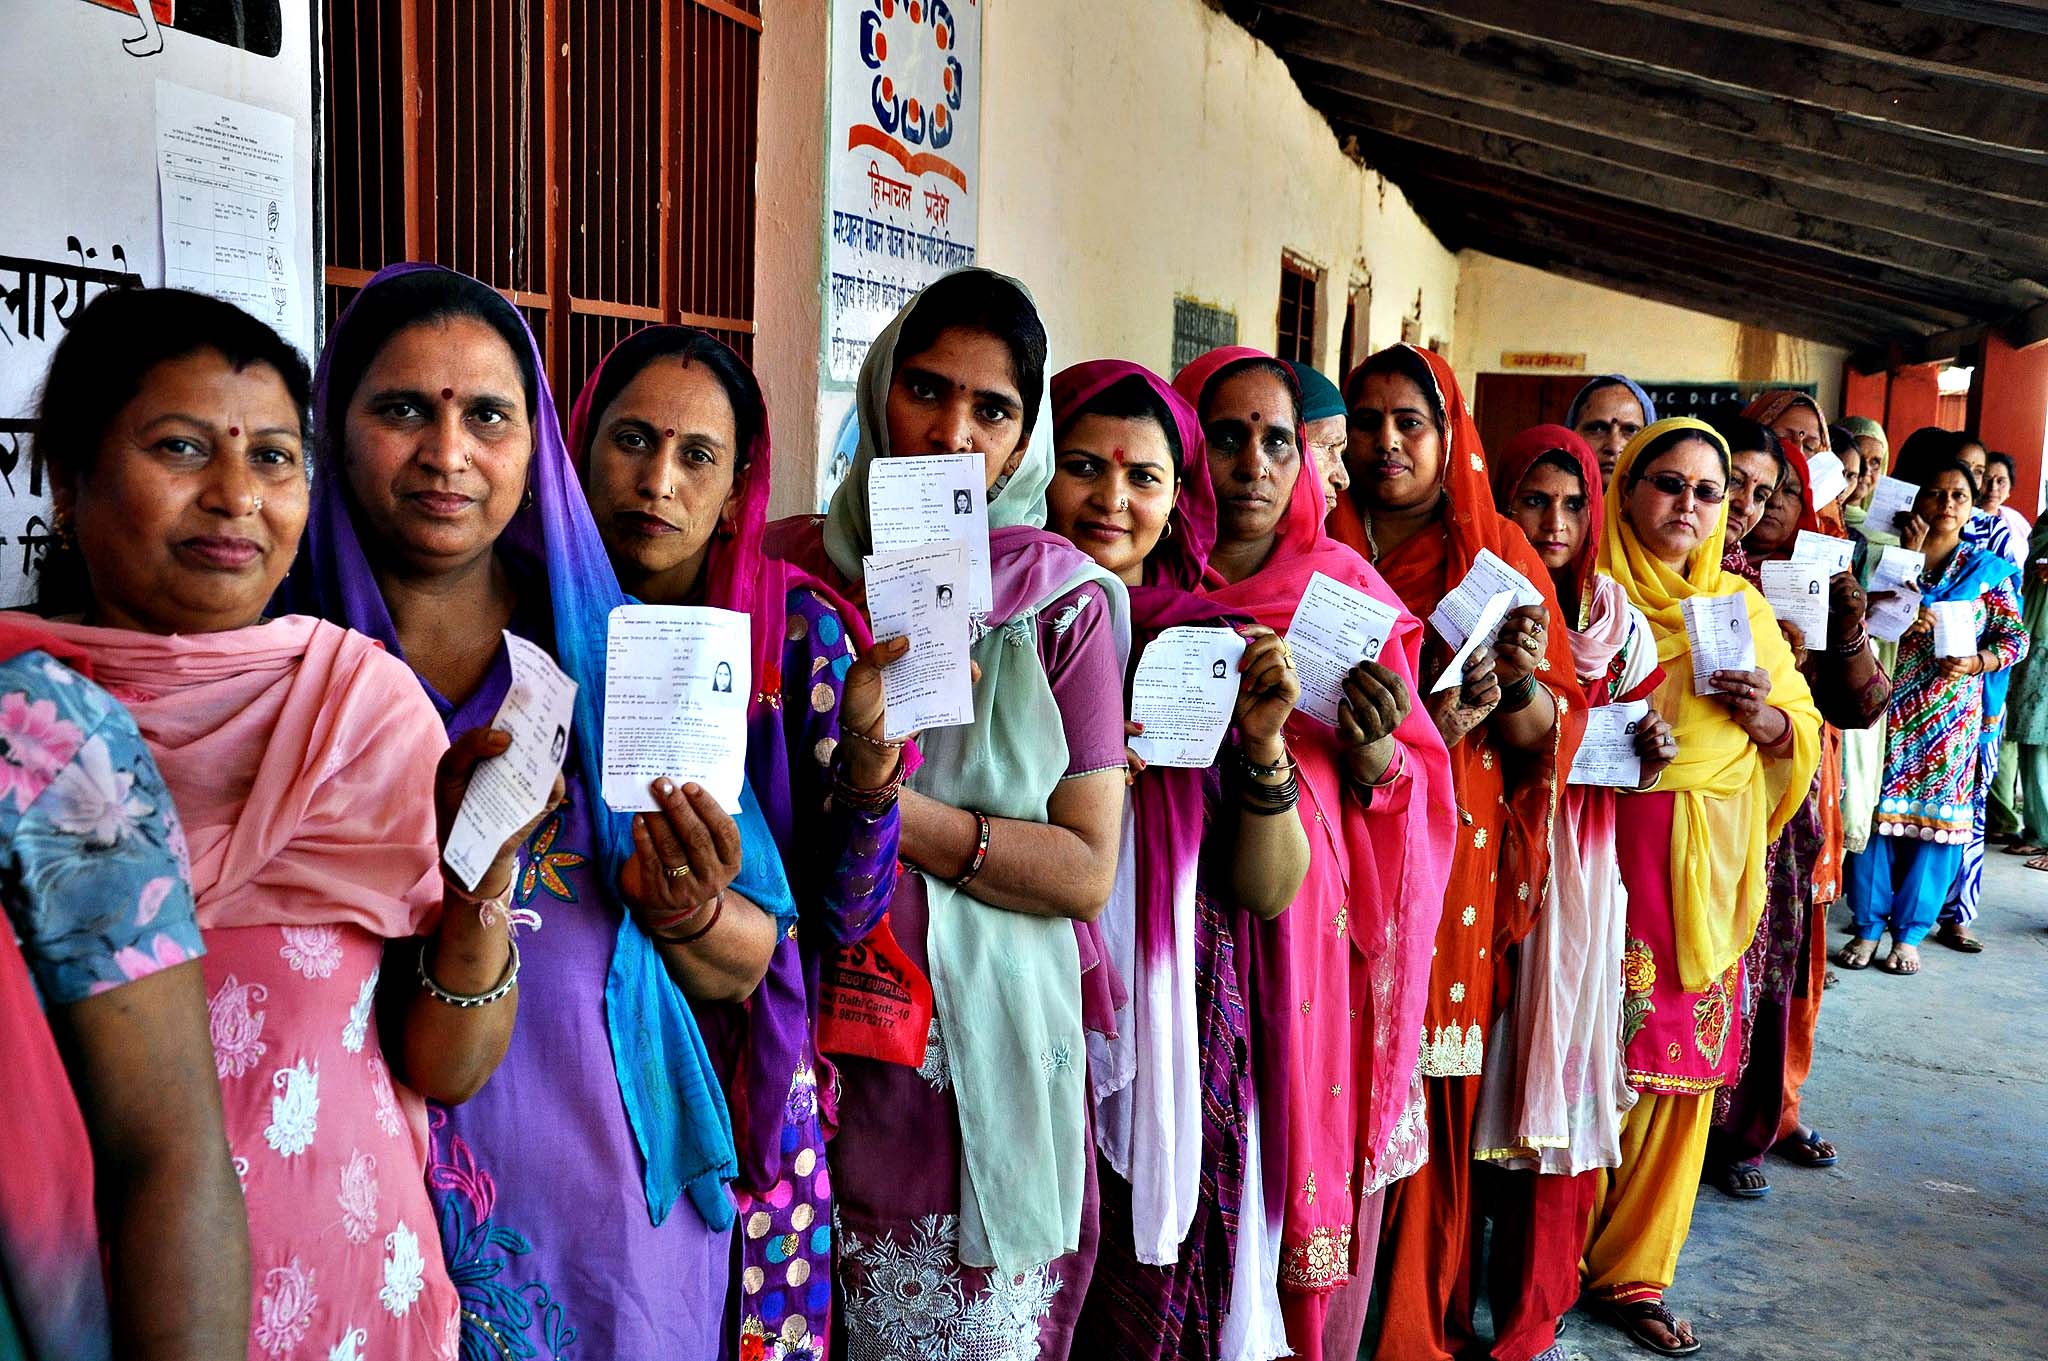 India’s Uttarakhand voters will crossover to Nepal to reach their polling booths